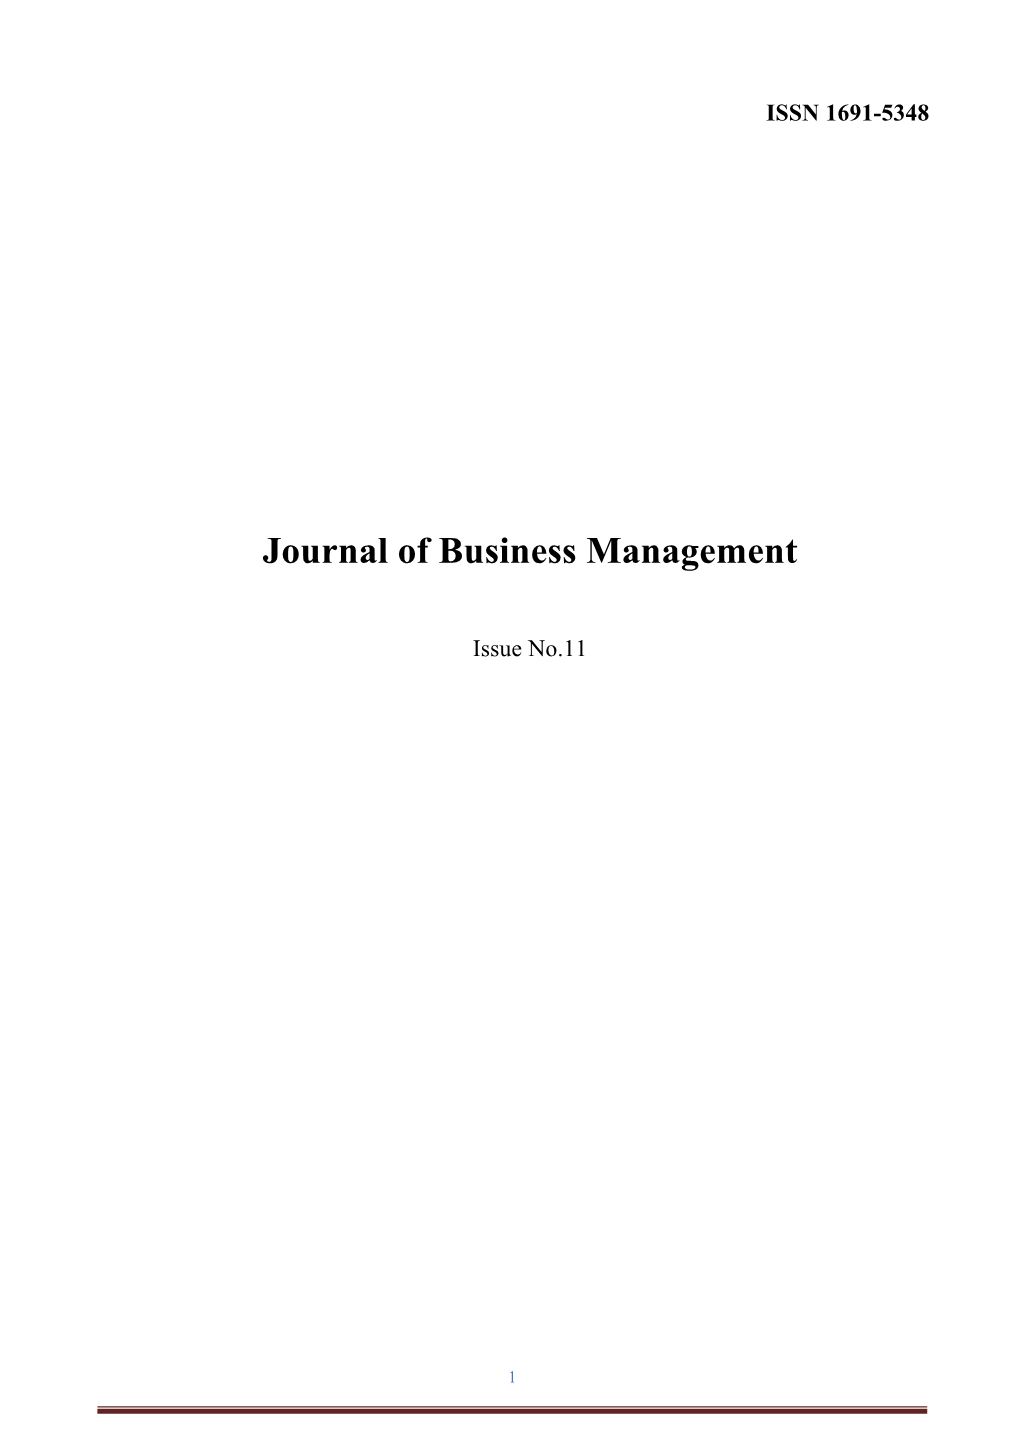 “Journal of Business Management No.11” (ISSN 1691-5348), 2016